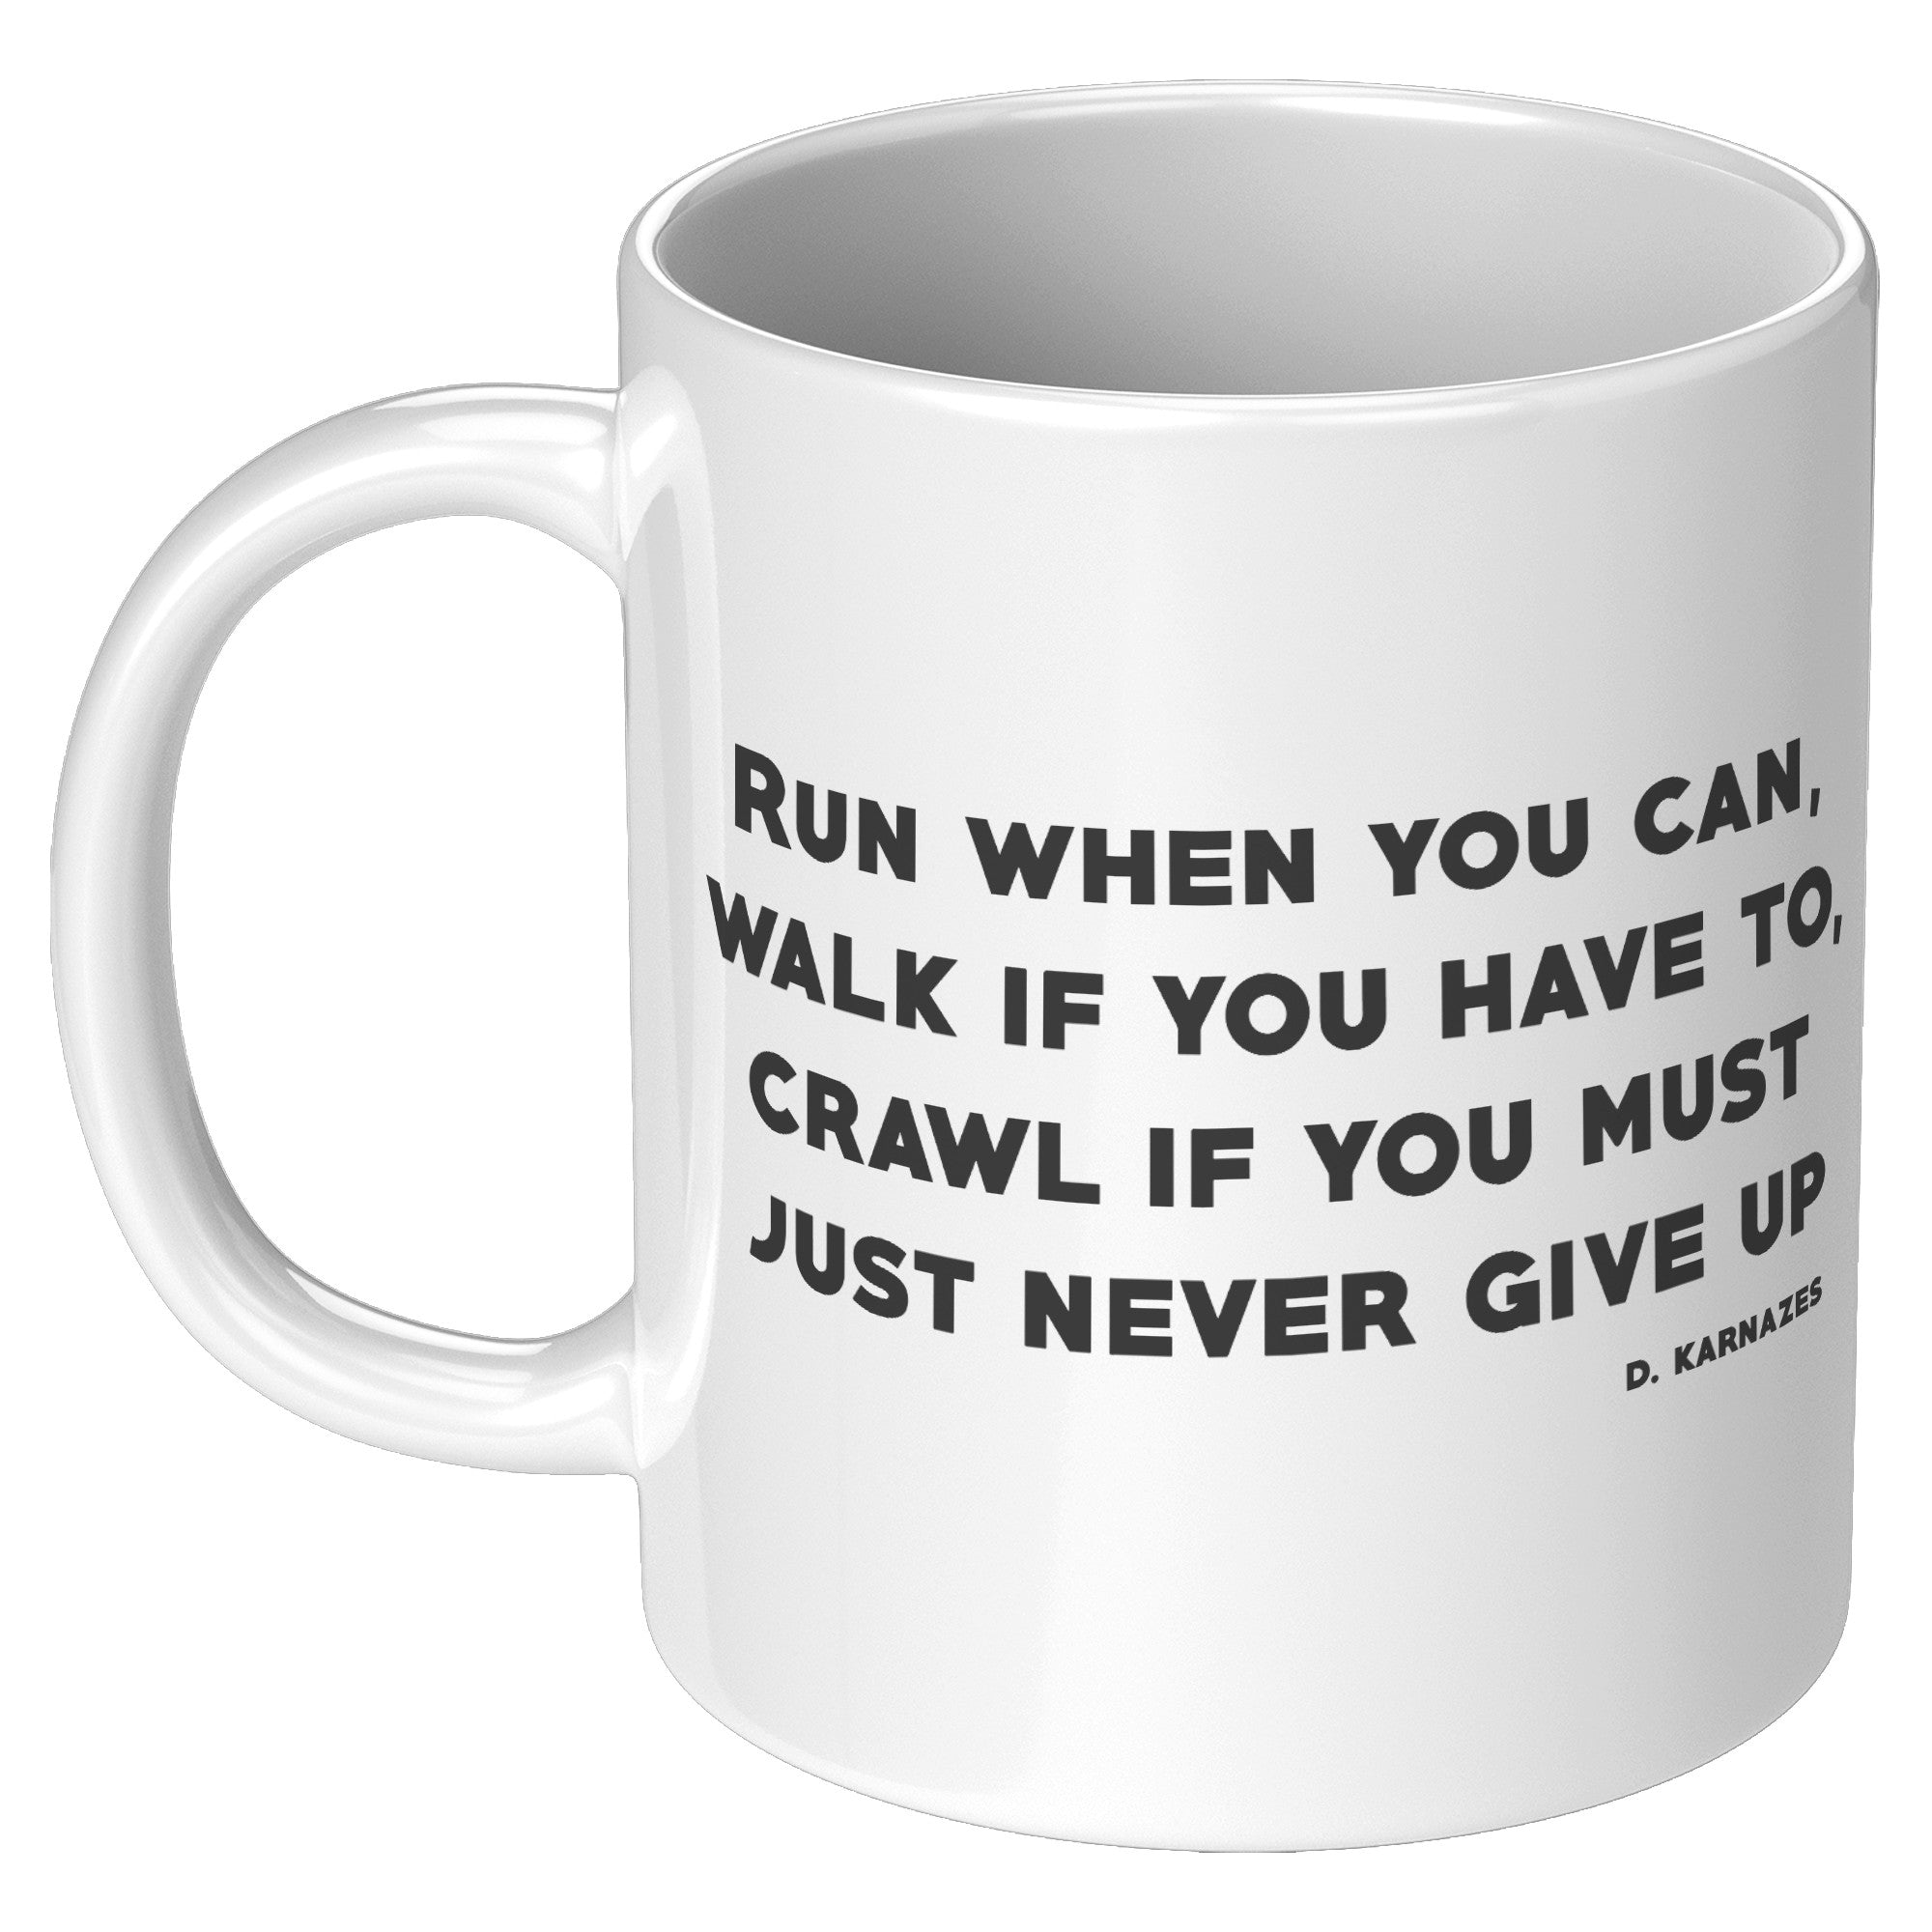 Male Runner Inspirational Mug - Motivational Running Quotes Cup - Perfect Gift for Marathon Men - Runner's Daily Dose of Determination - B